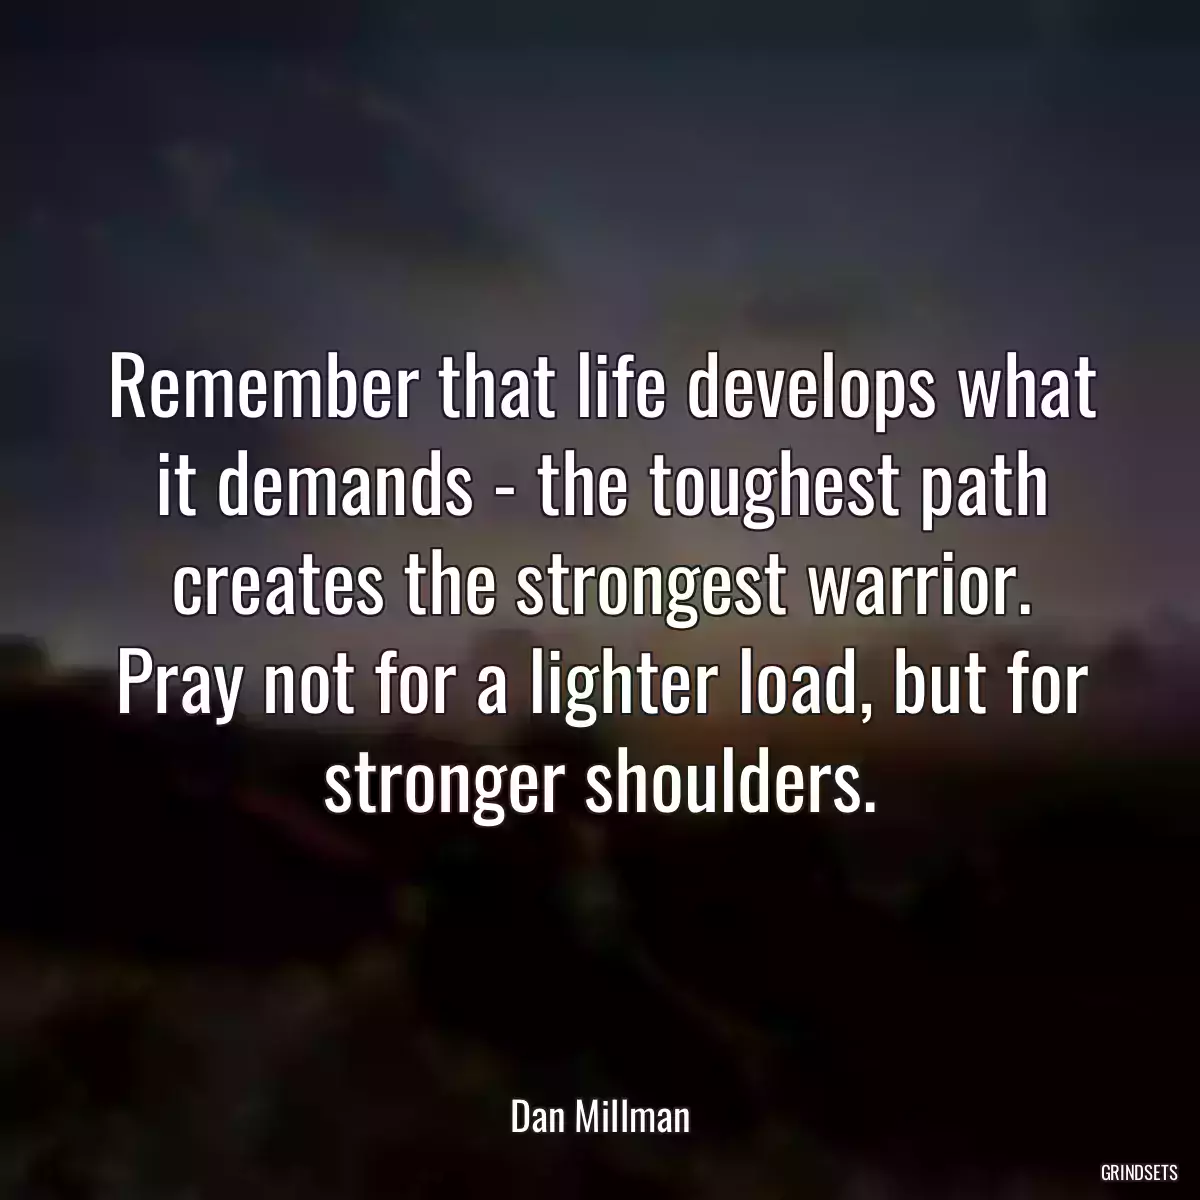 Remember that life develops what it demands - the toughest path creates the strongest warrior. Pray not for a lighter load, but for stronger shoulders.